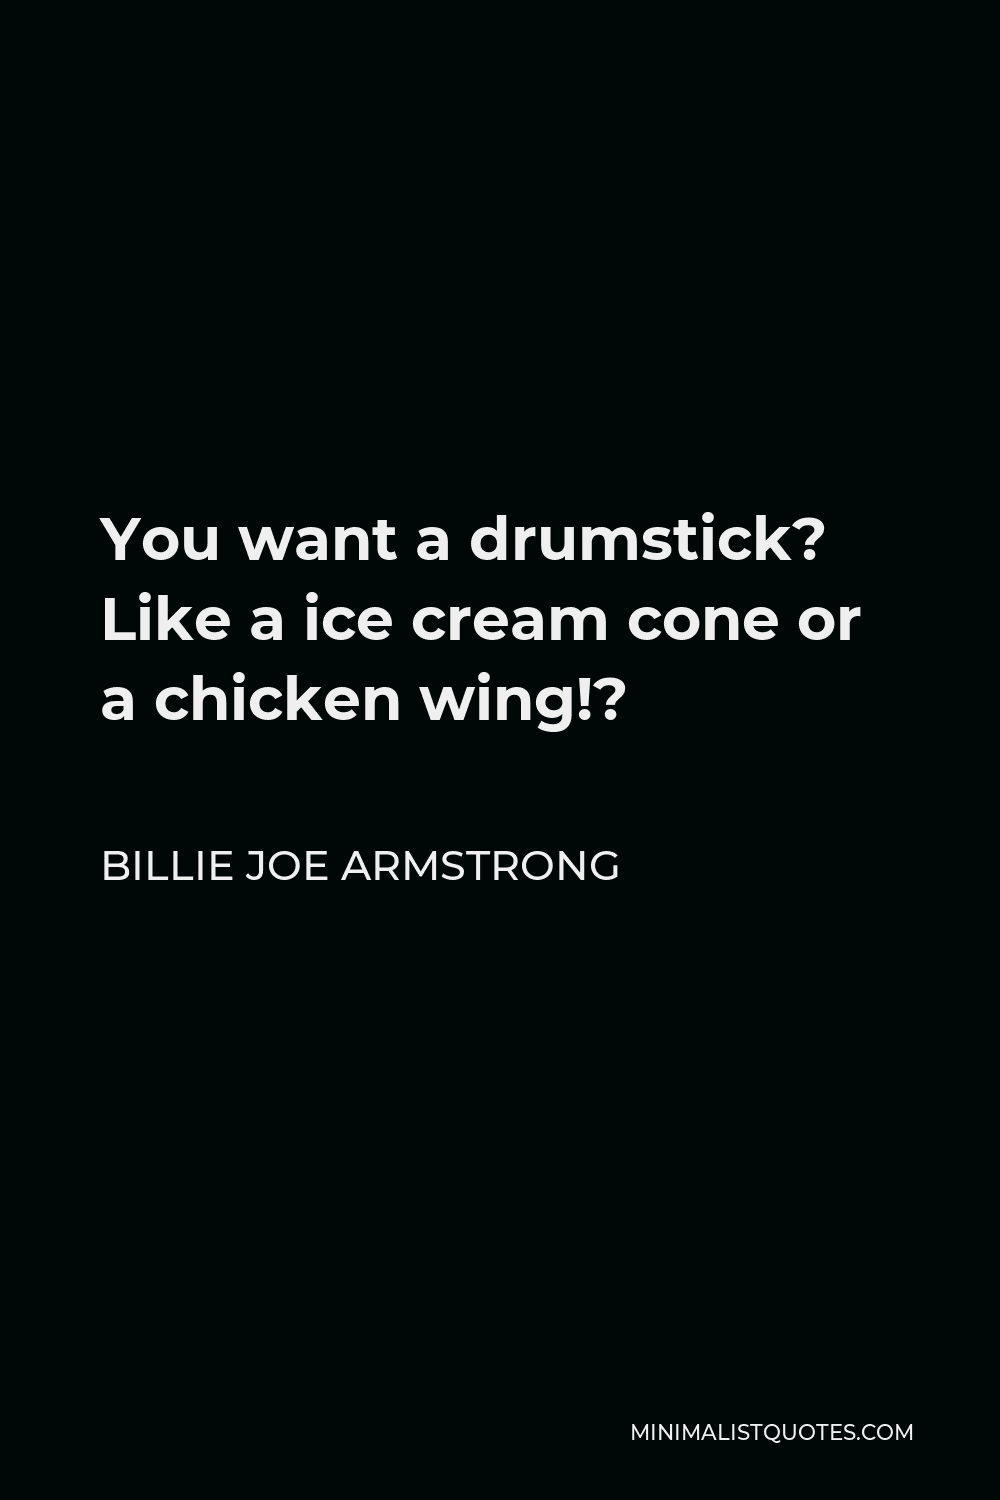 Billie Joe Armstrong Quote - You want a drumstick? Like a ice cream cone or a chicken wing!?